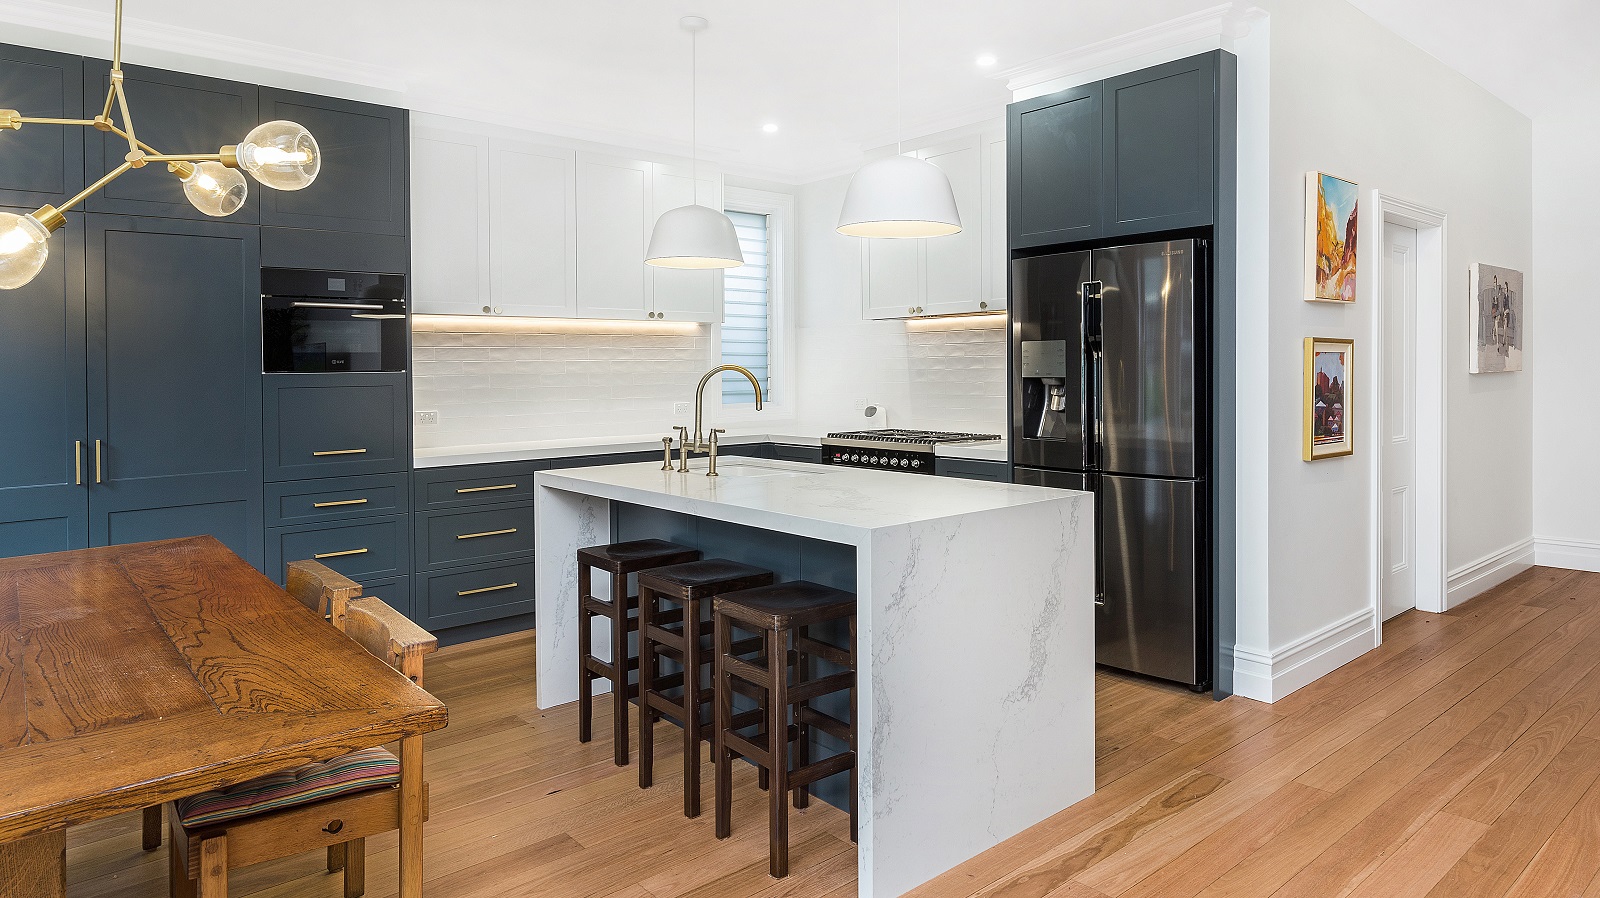 AFTER Annandale Renovation - Shaker style kitchen, Caesarstone bench with waterfall return, Blue Rhapsody door colour